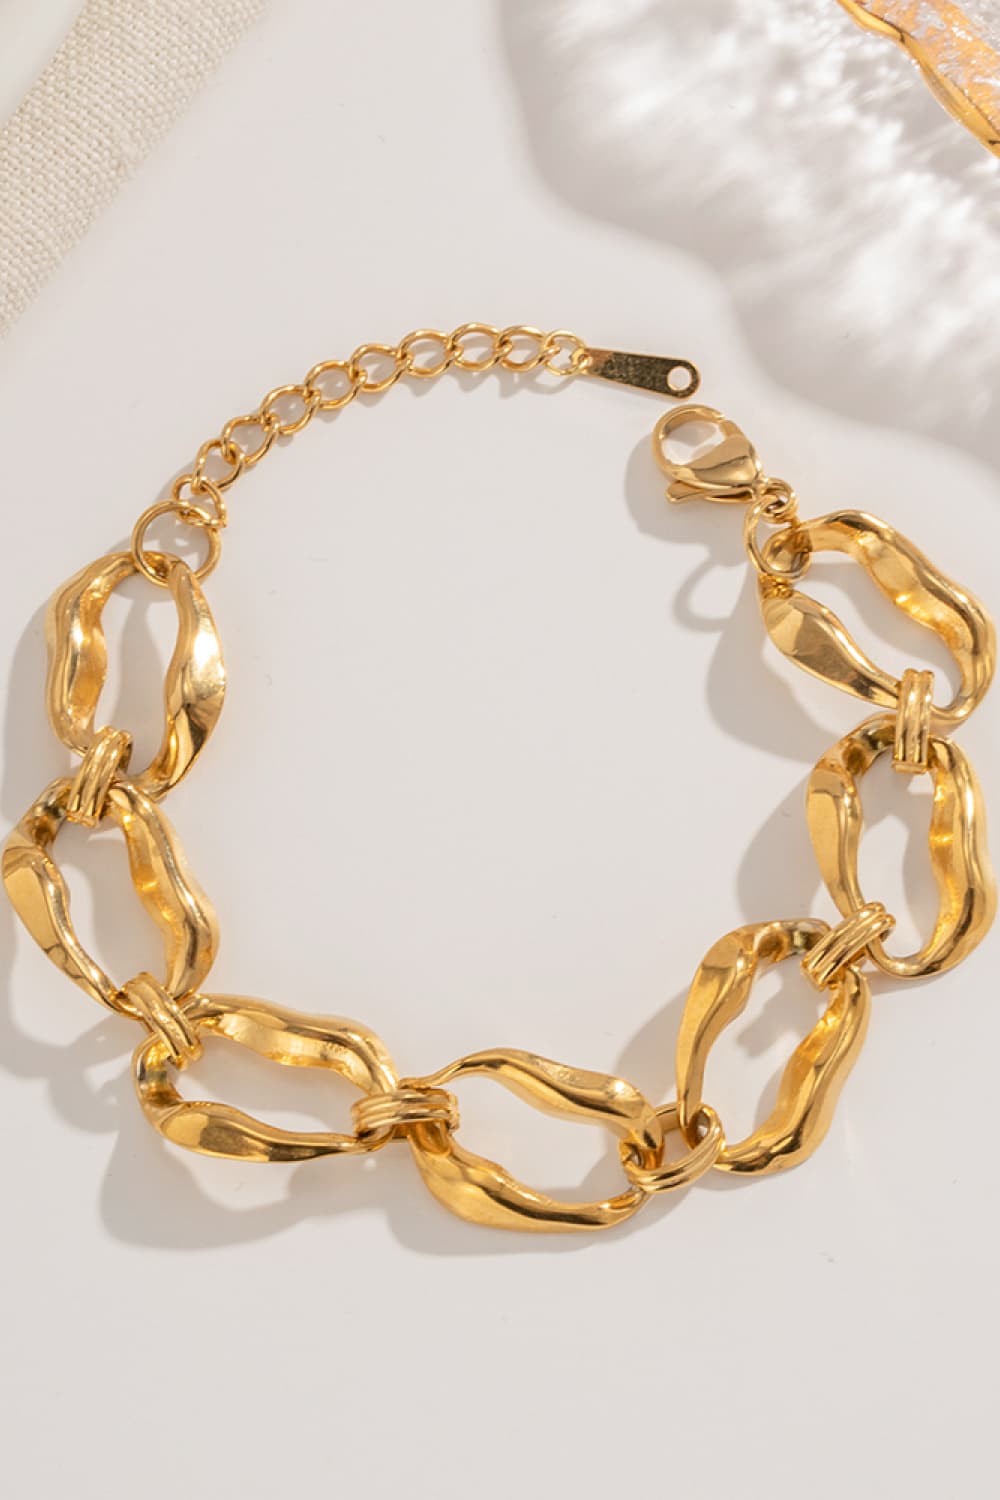 18K Gold-Plated Stainless Steel Bracelet - Mythical Kitty Boutique